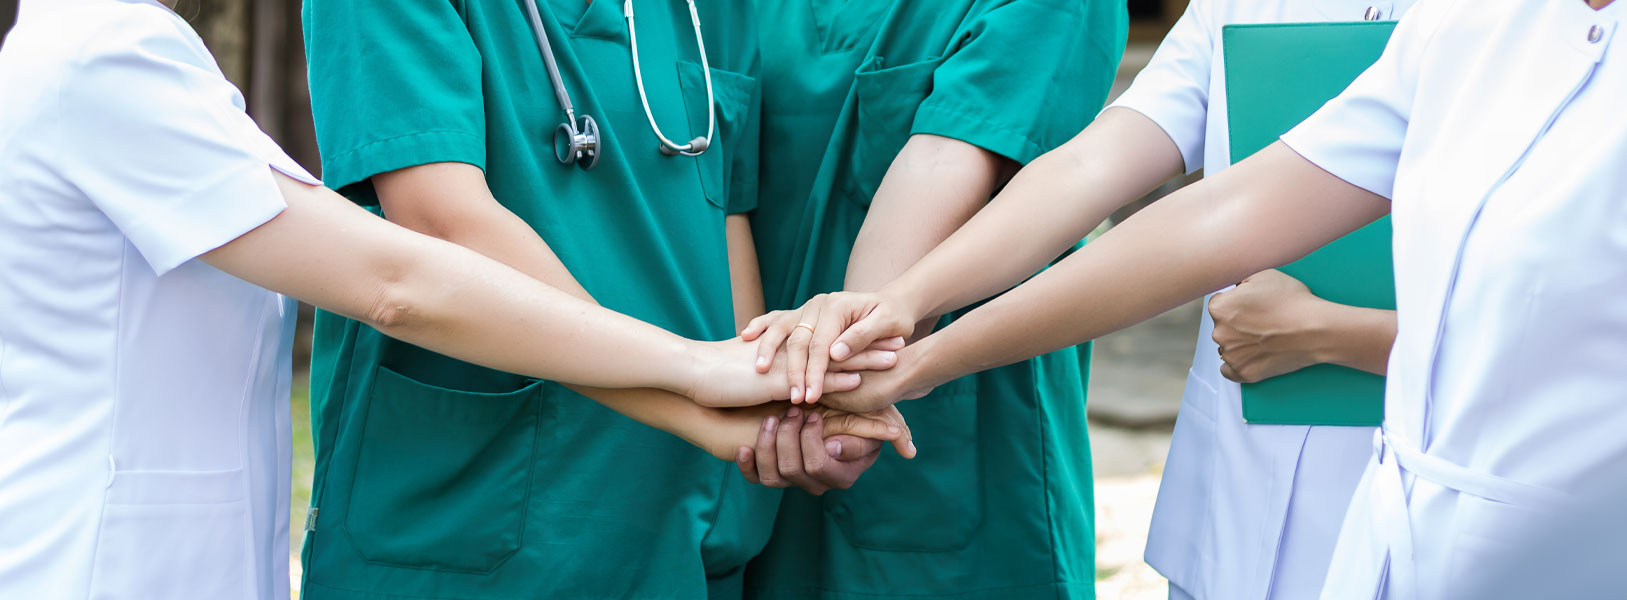 A group of medical employees are holding their hands in a team effort